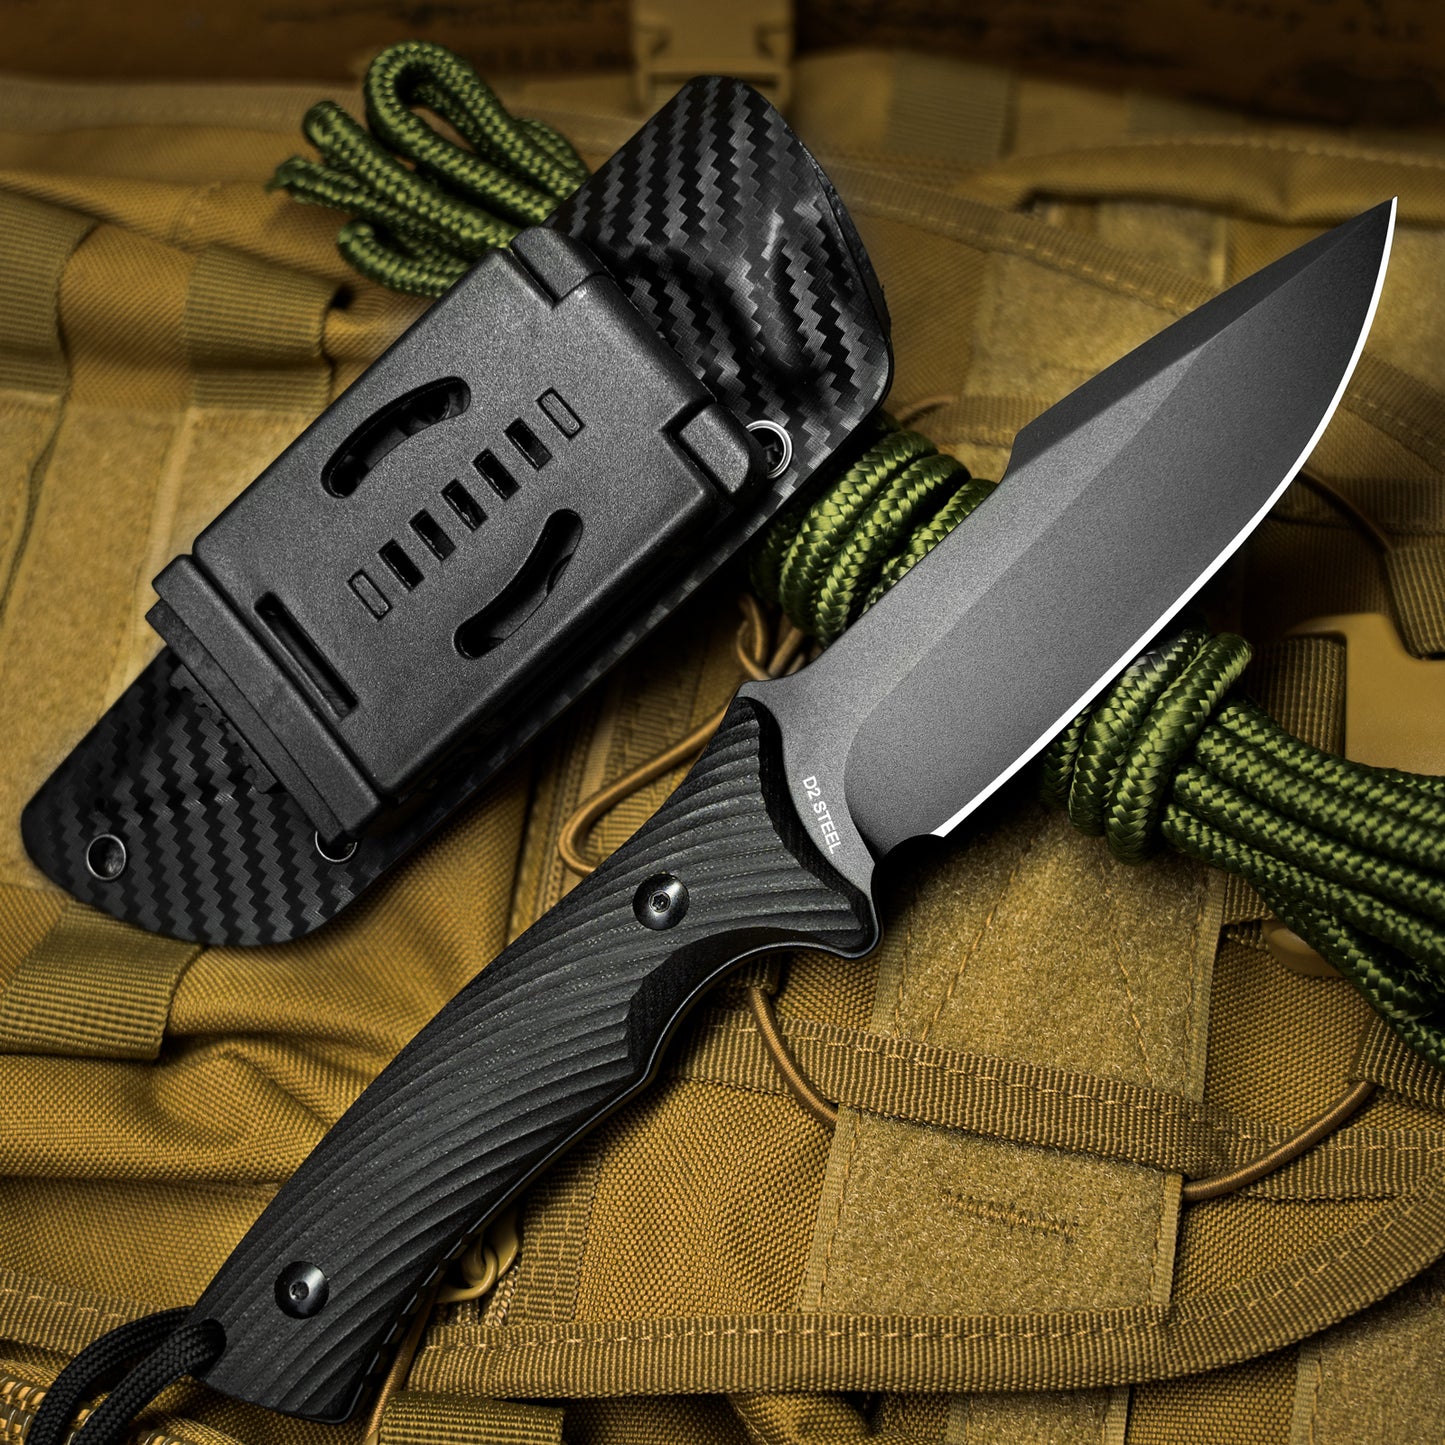 LOTHAR KA52 Survival Knife, 4.5'' D2 Blade Full Tang Fixed Blade Hunting Knife with Kydex Sheath, Black G10 Handle,  Great Knife for Camping, Bushcraft or Hunting